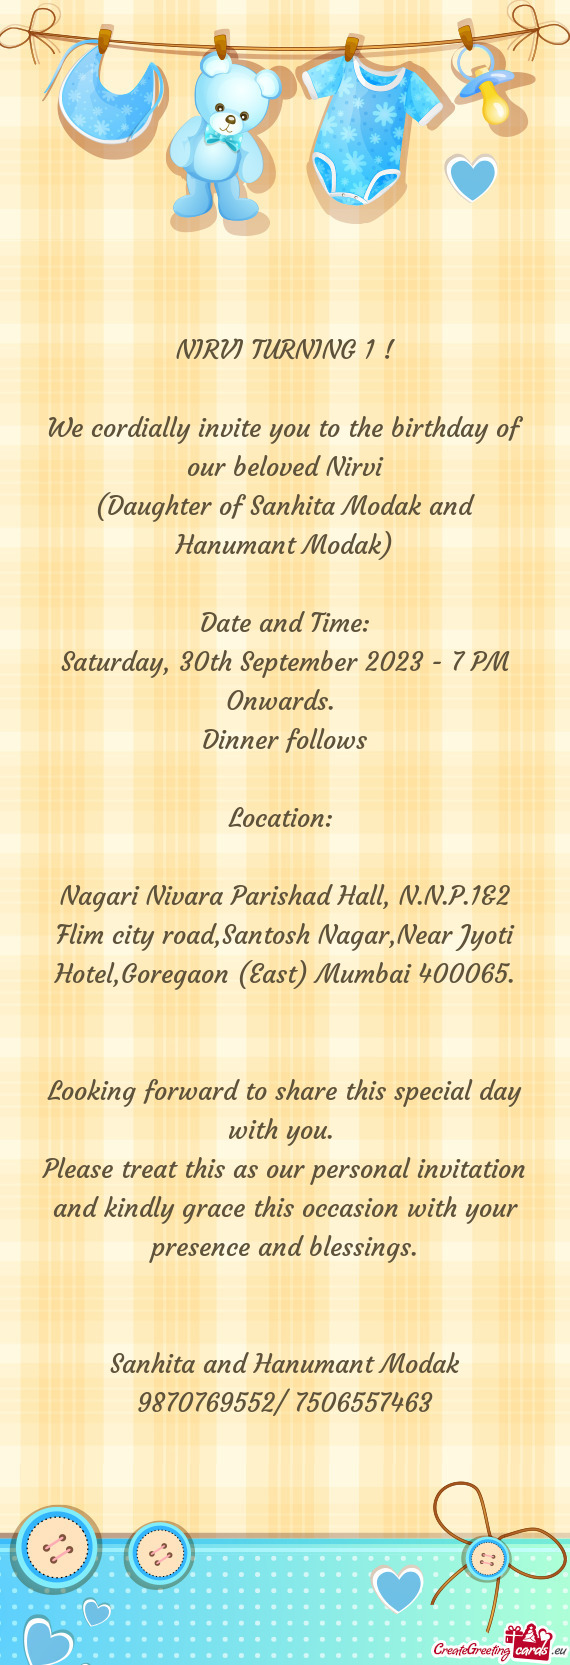 We cordially invite you to the birthday of our beloved Nirvi